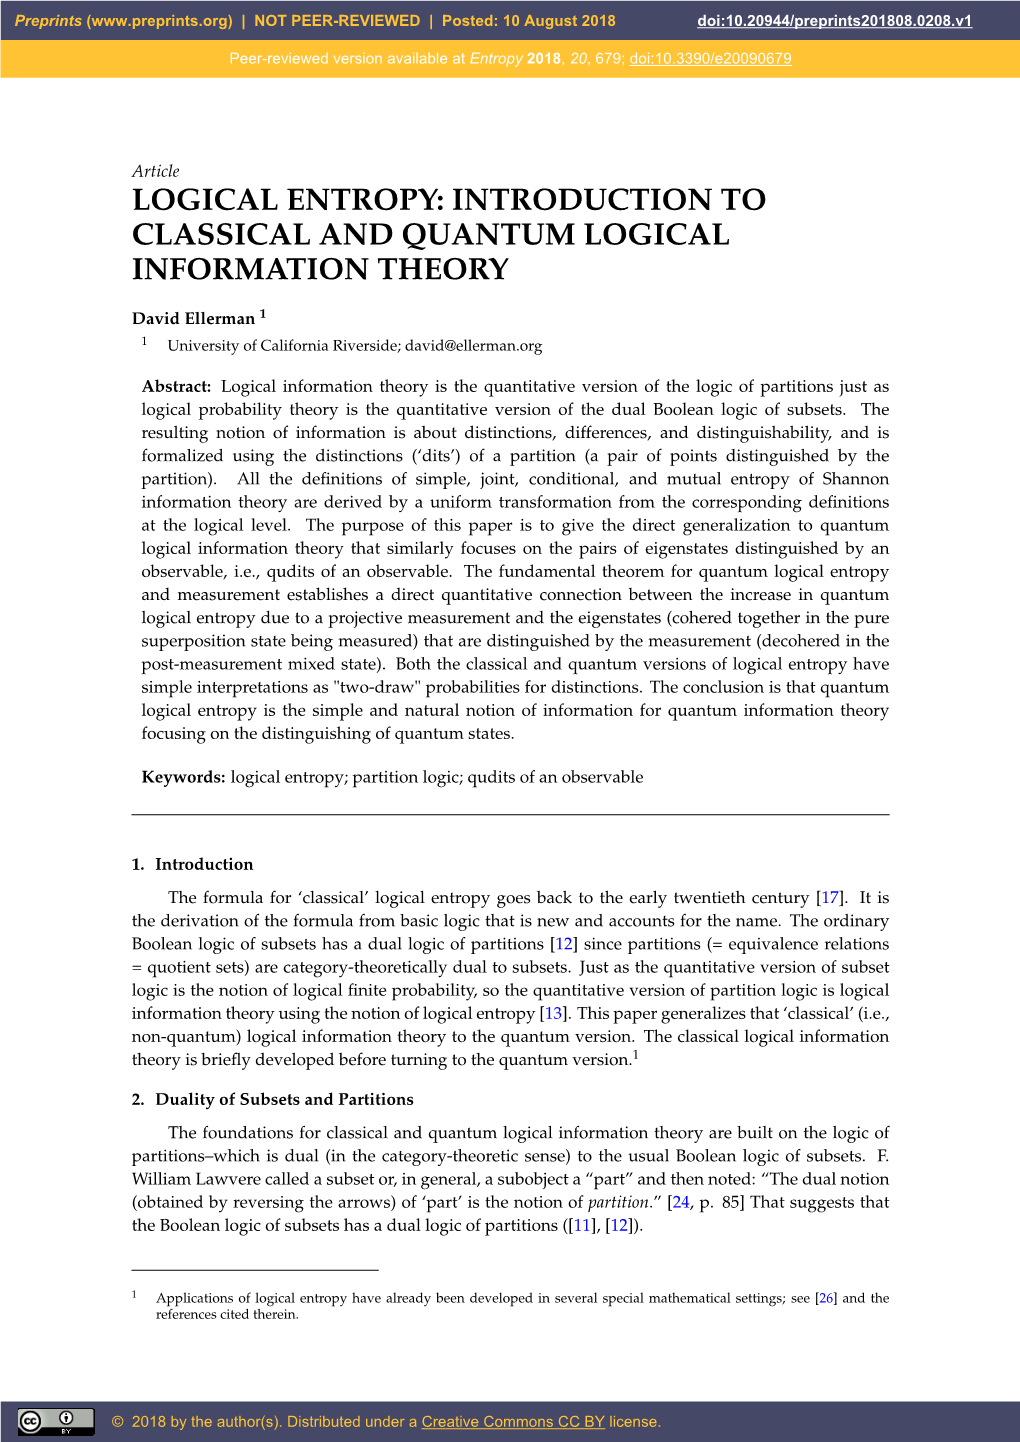 Logical Entropy: Introduction to Classical and Quantum Logical Information Theory